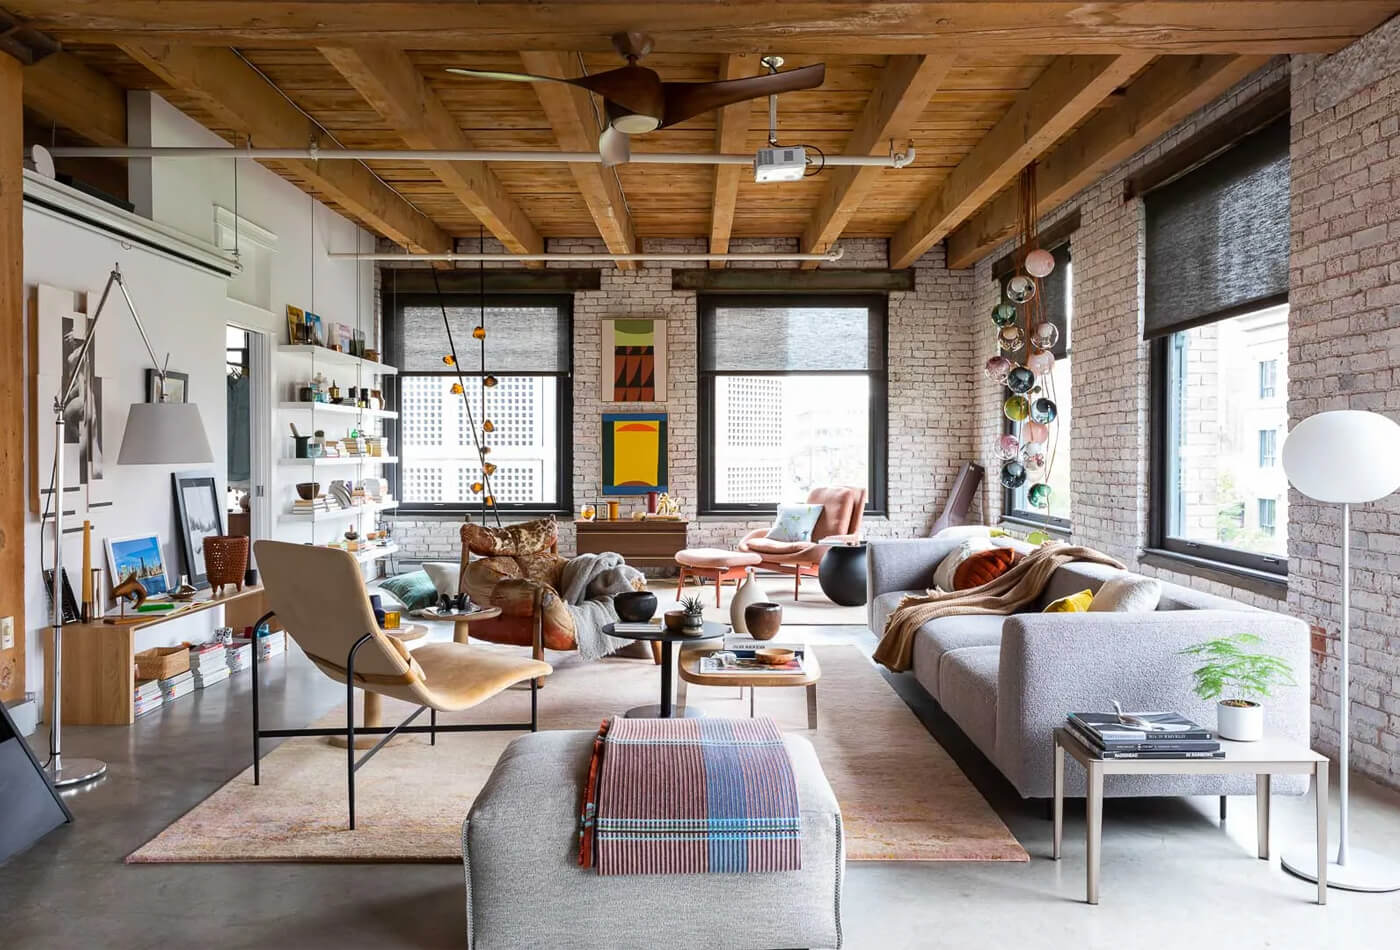 Industrial Loft Design - A Budget-Friendly Renovation For Your Residence